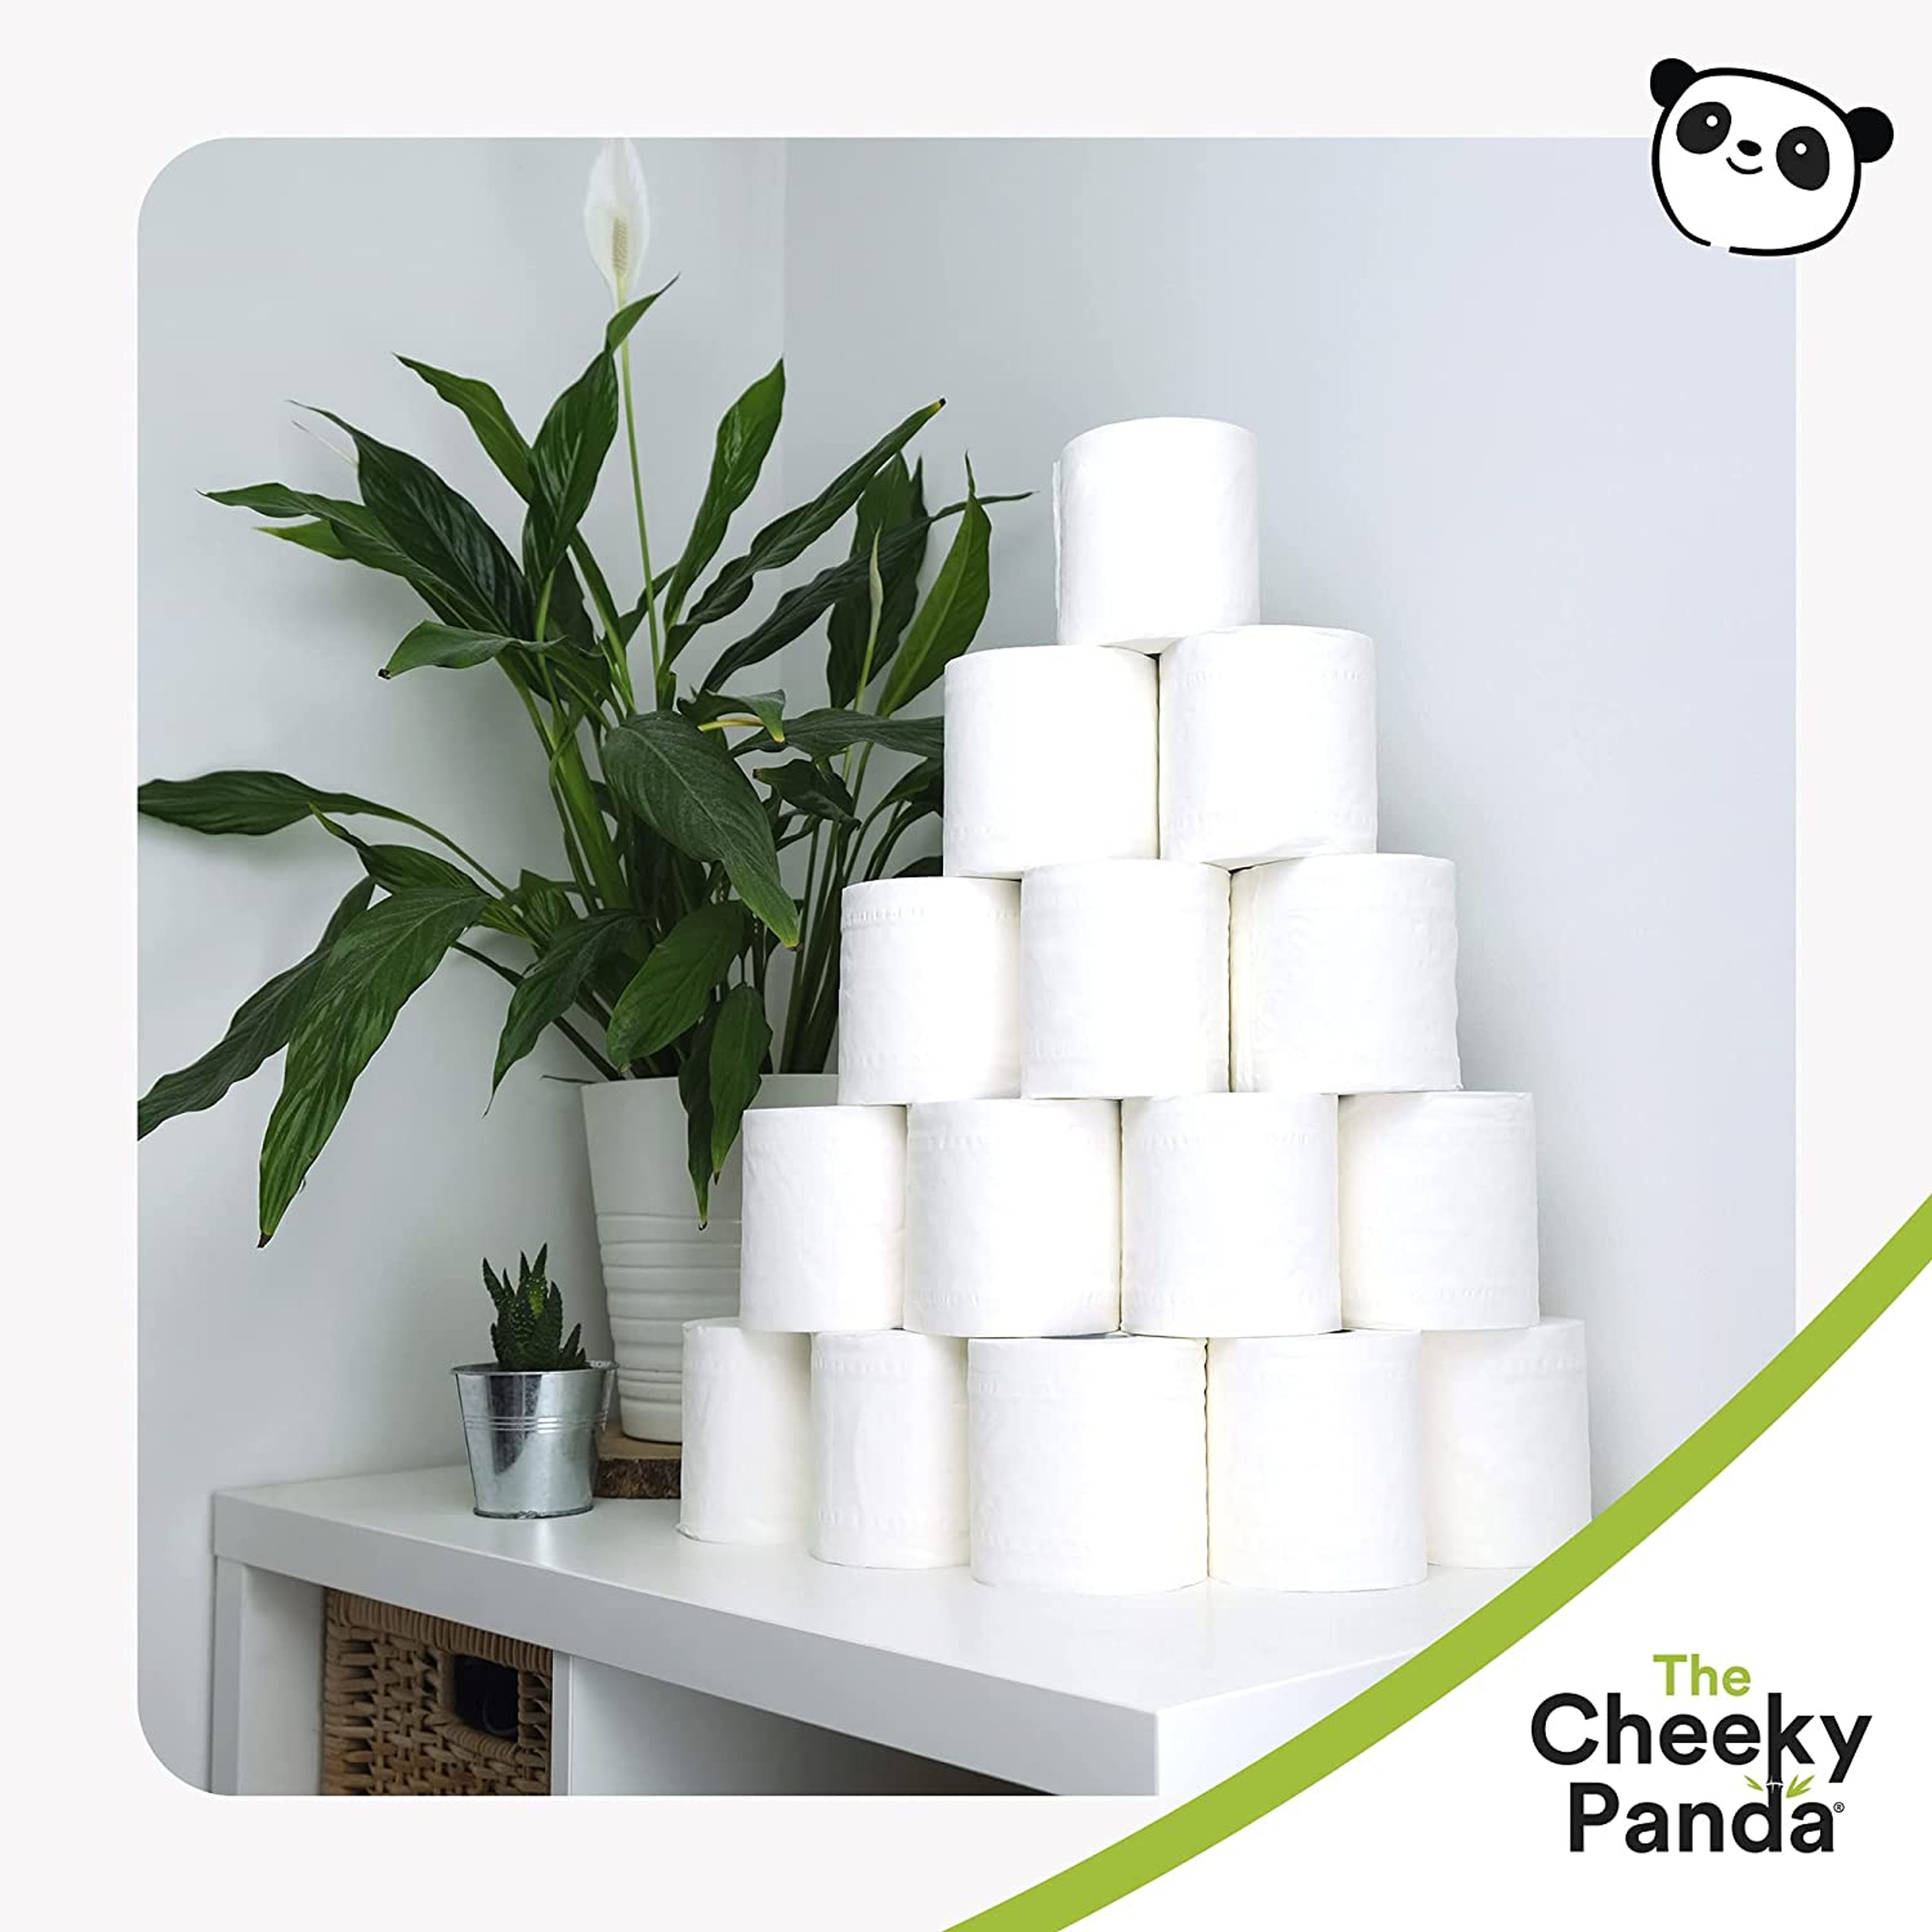 Bamboo Toilet Paper | 24 Rolls | Eco Friendly